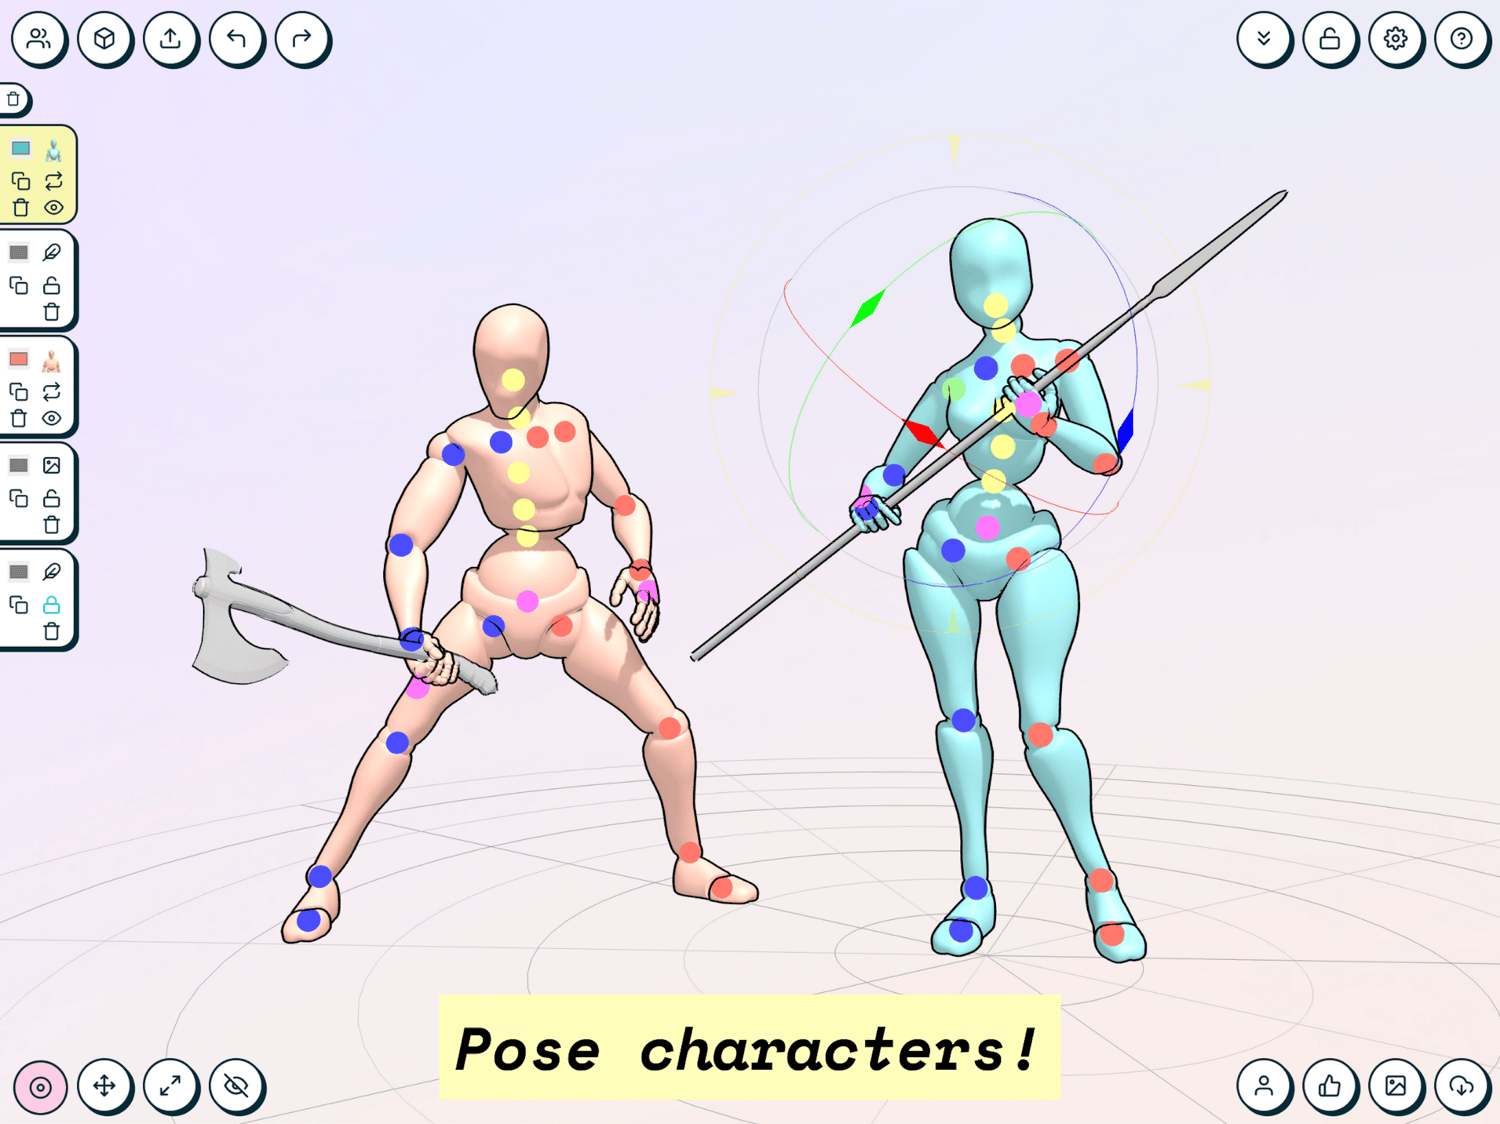 Pose characters!